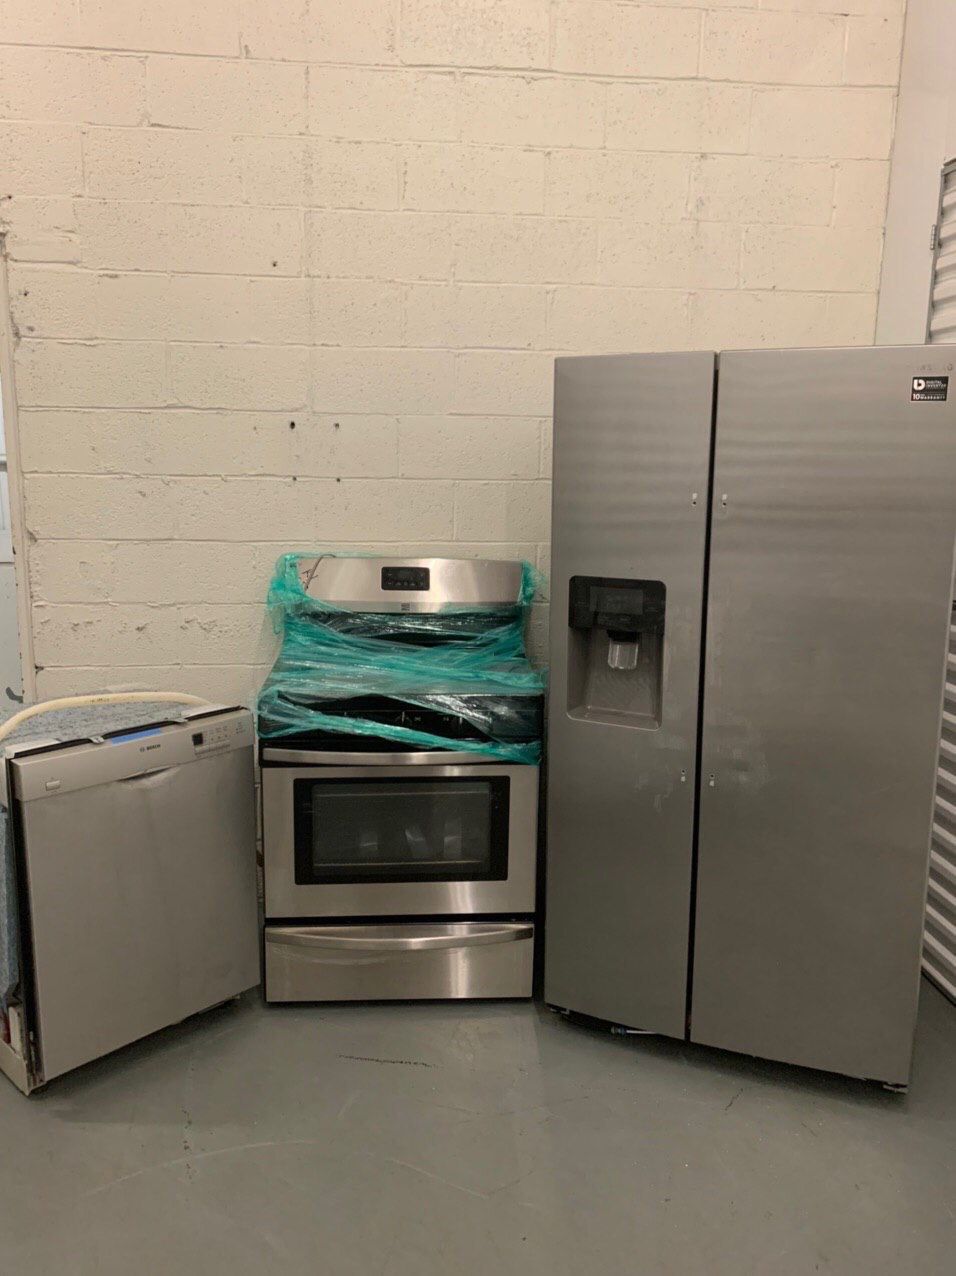 STAINLESS KITCHEN APPLIANCE SET FOR SALE NEW & USED FLOOR MODEL